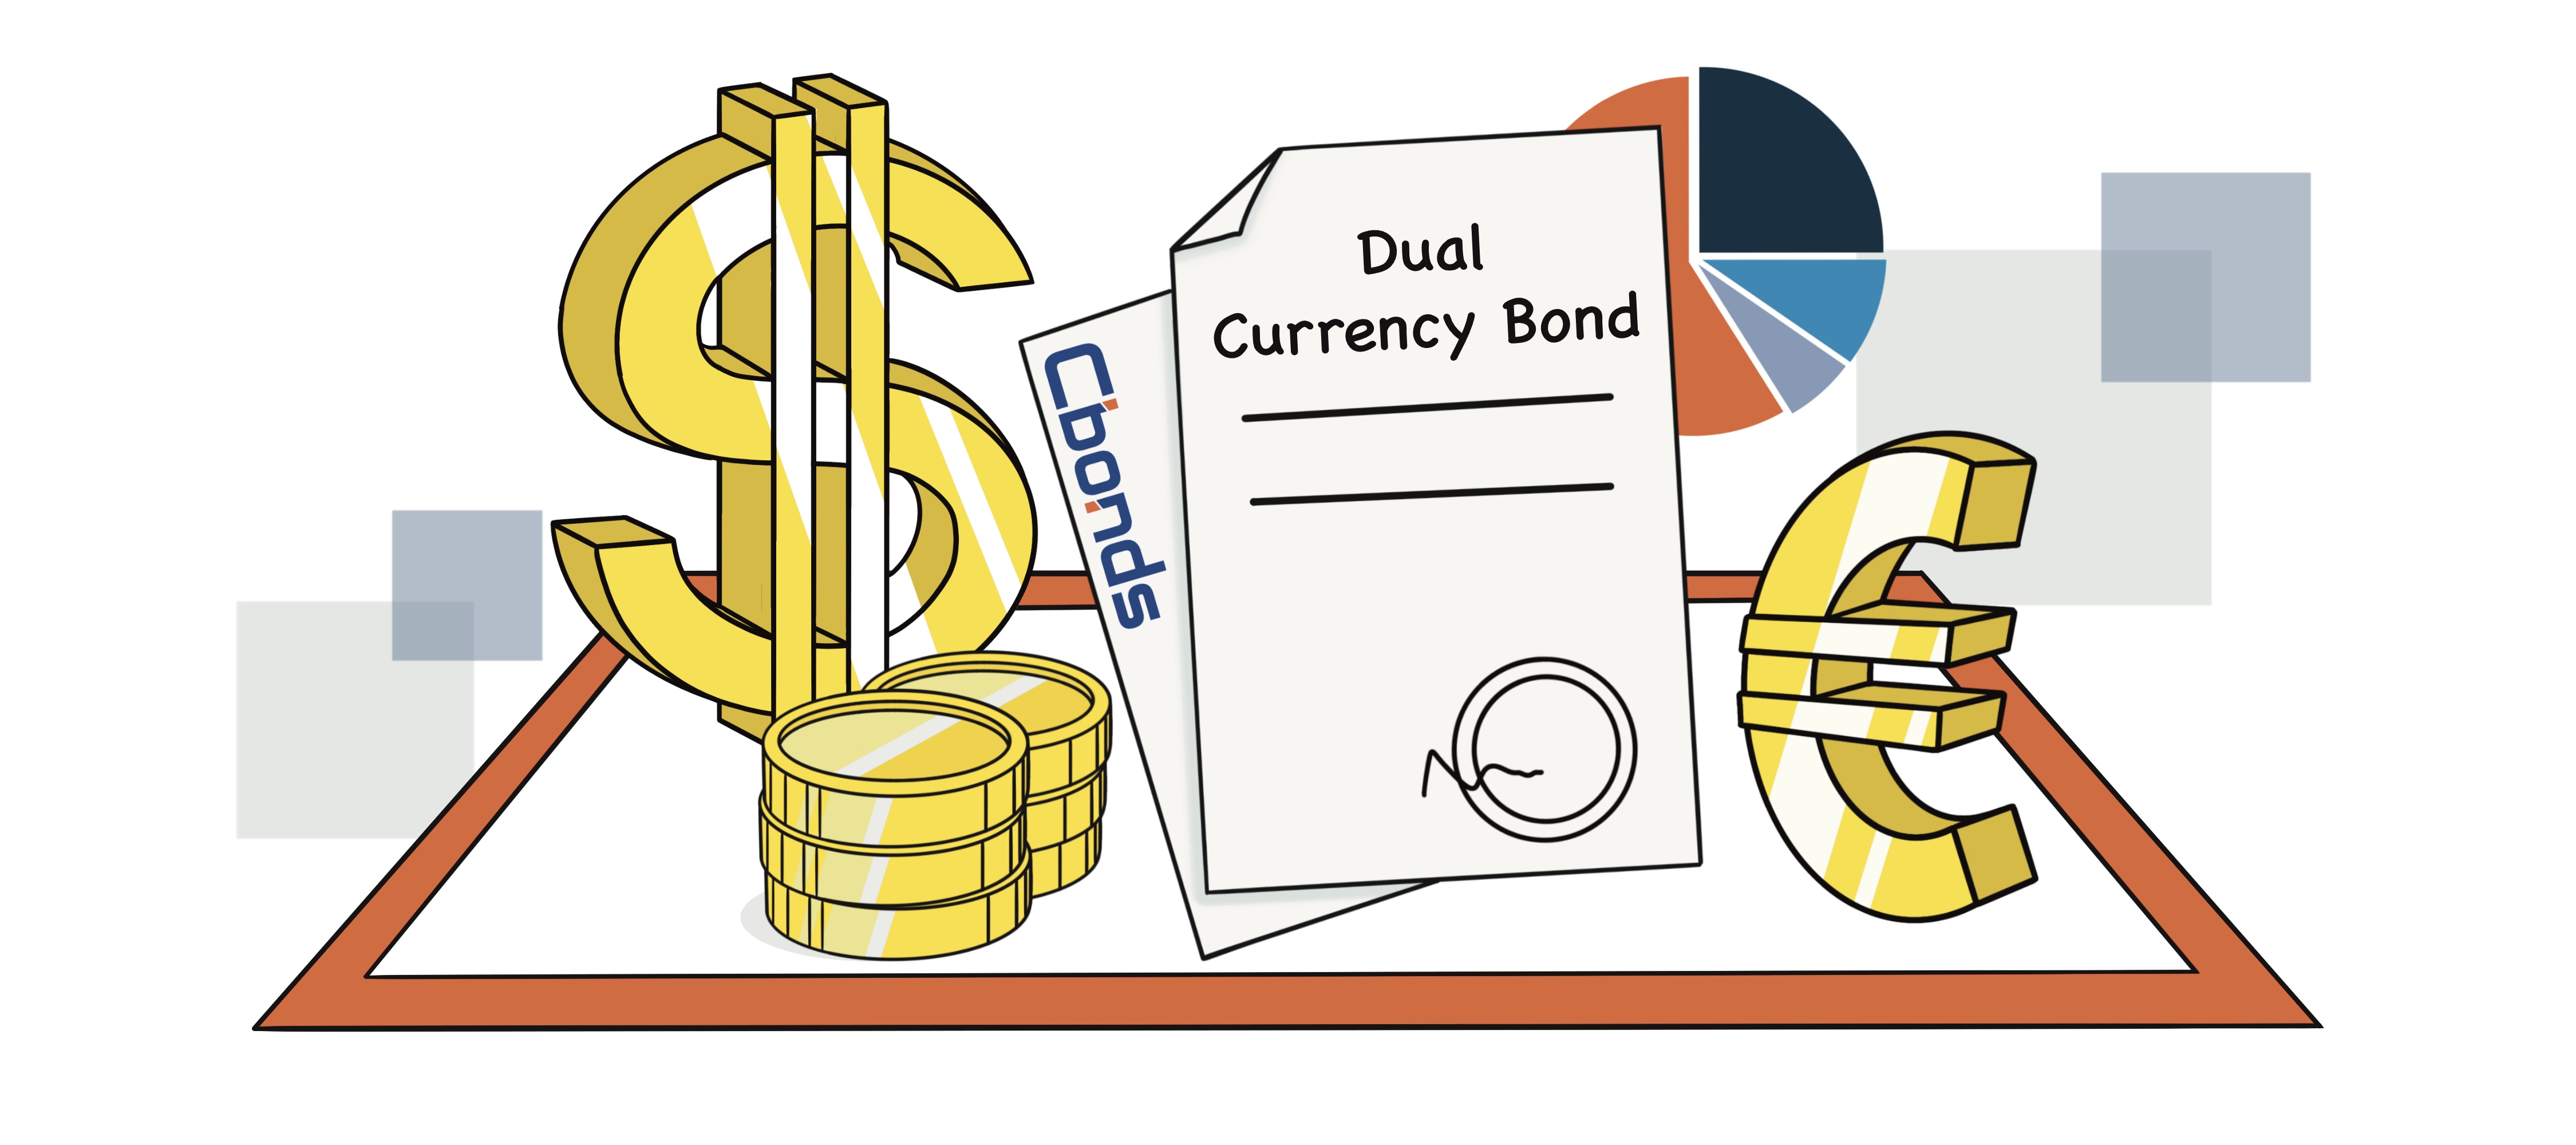 Dual Currency Bond